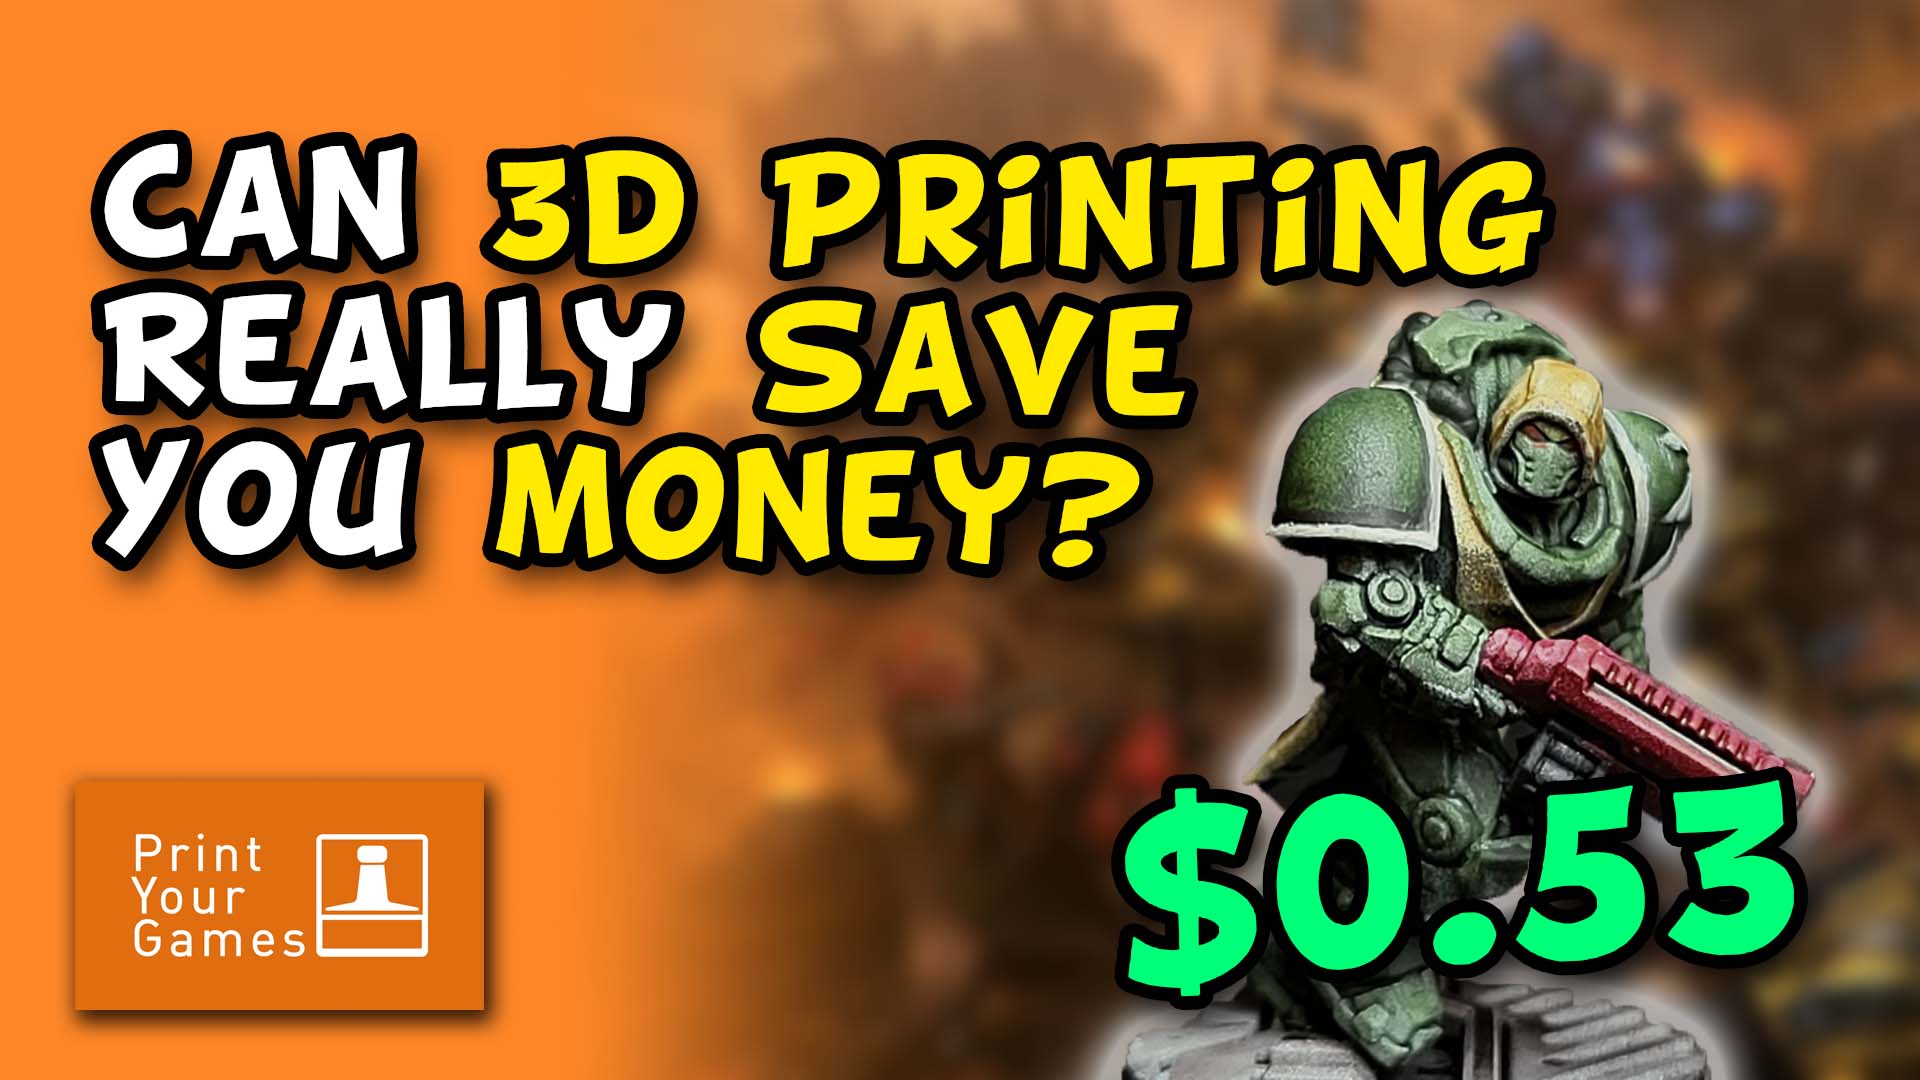 Can 3d Printing Really Save You Money?